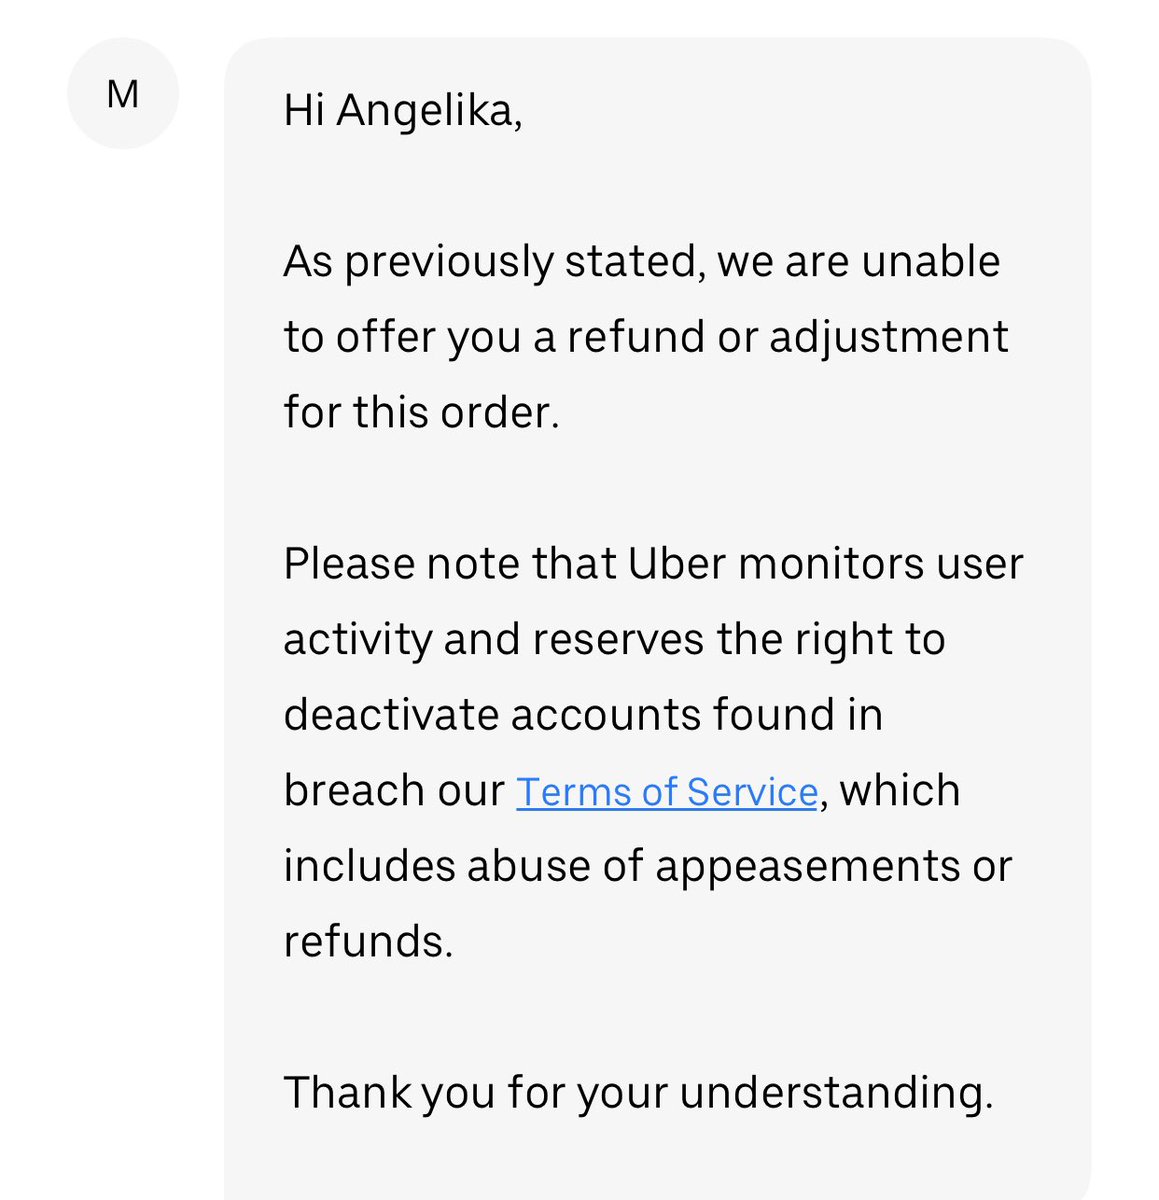 lol just got threatened with deactivation BECAUSE i’ve had 6 partial refunds over wrong orders in my whole uber lifetime